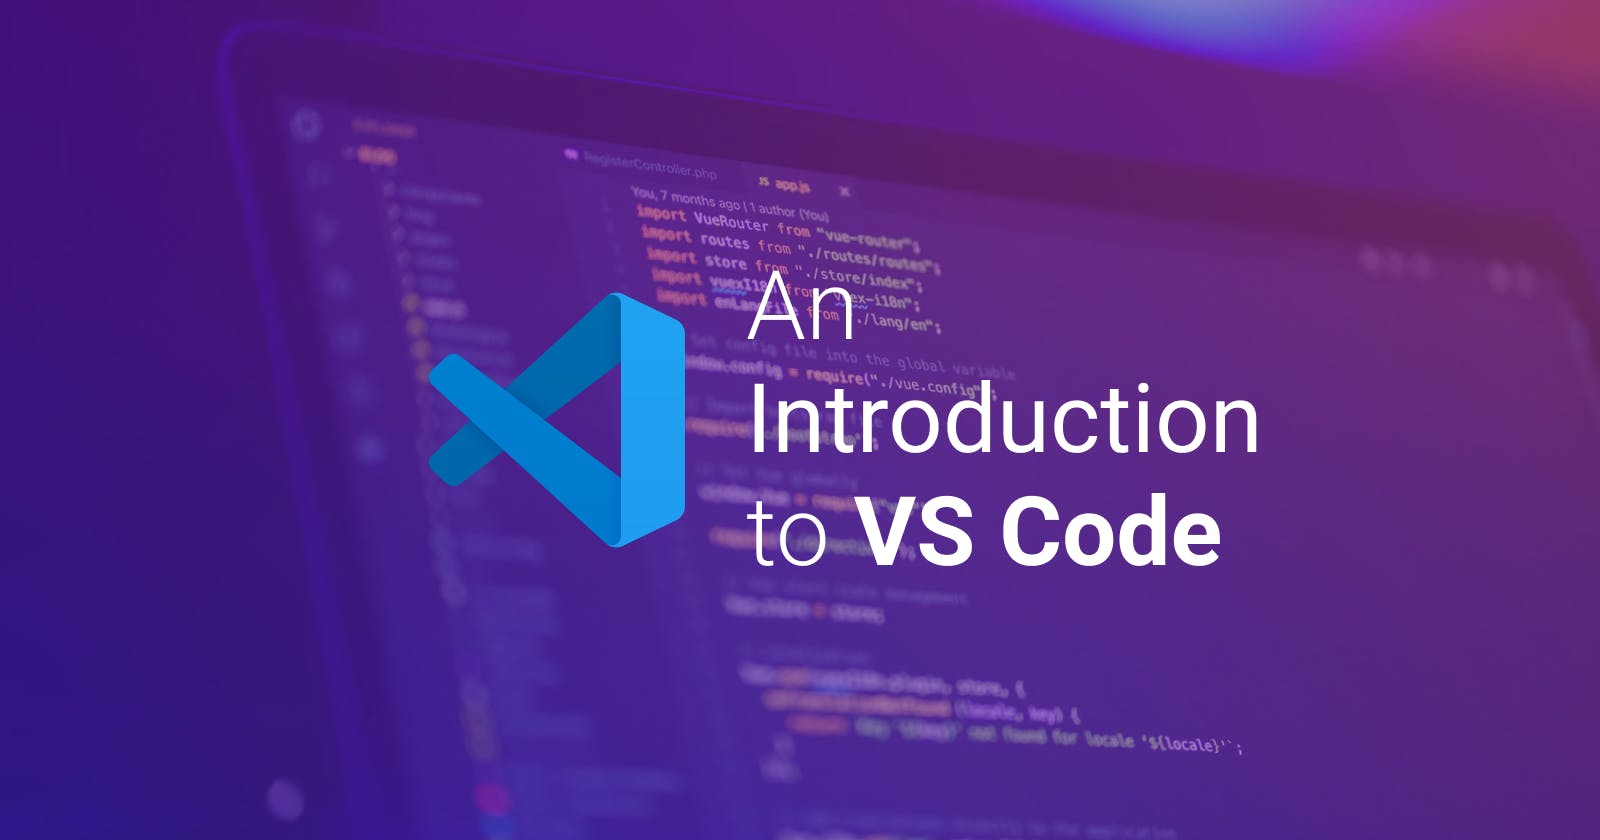 An Introduction to VS Code